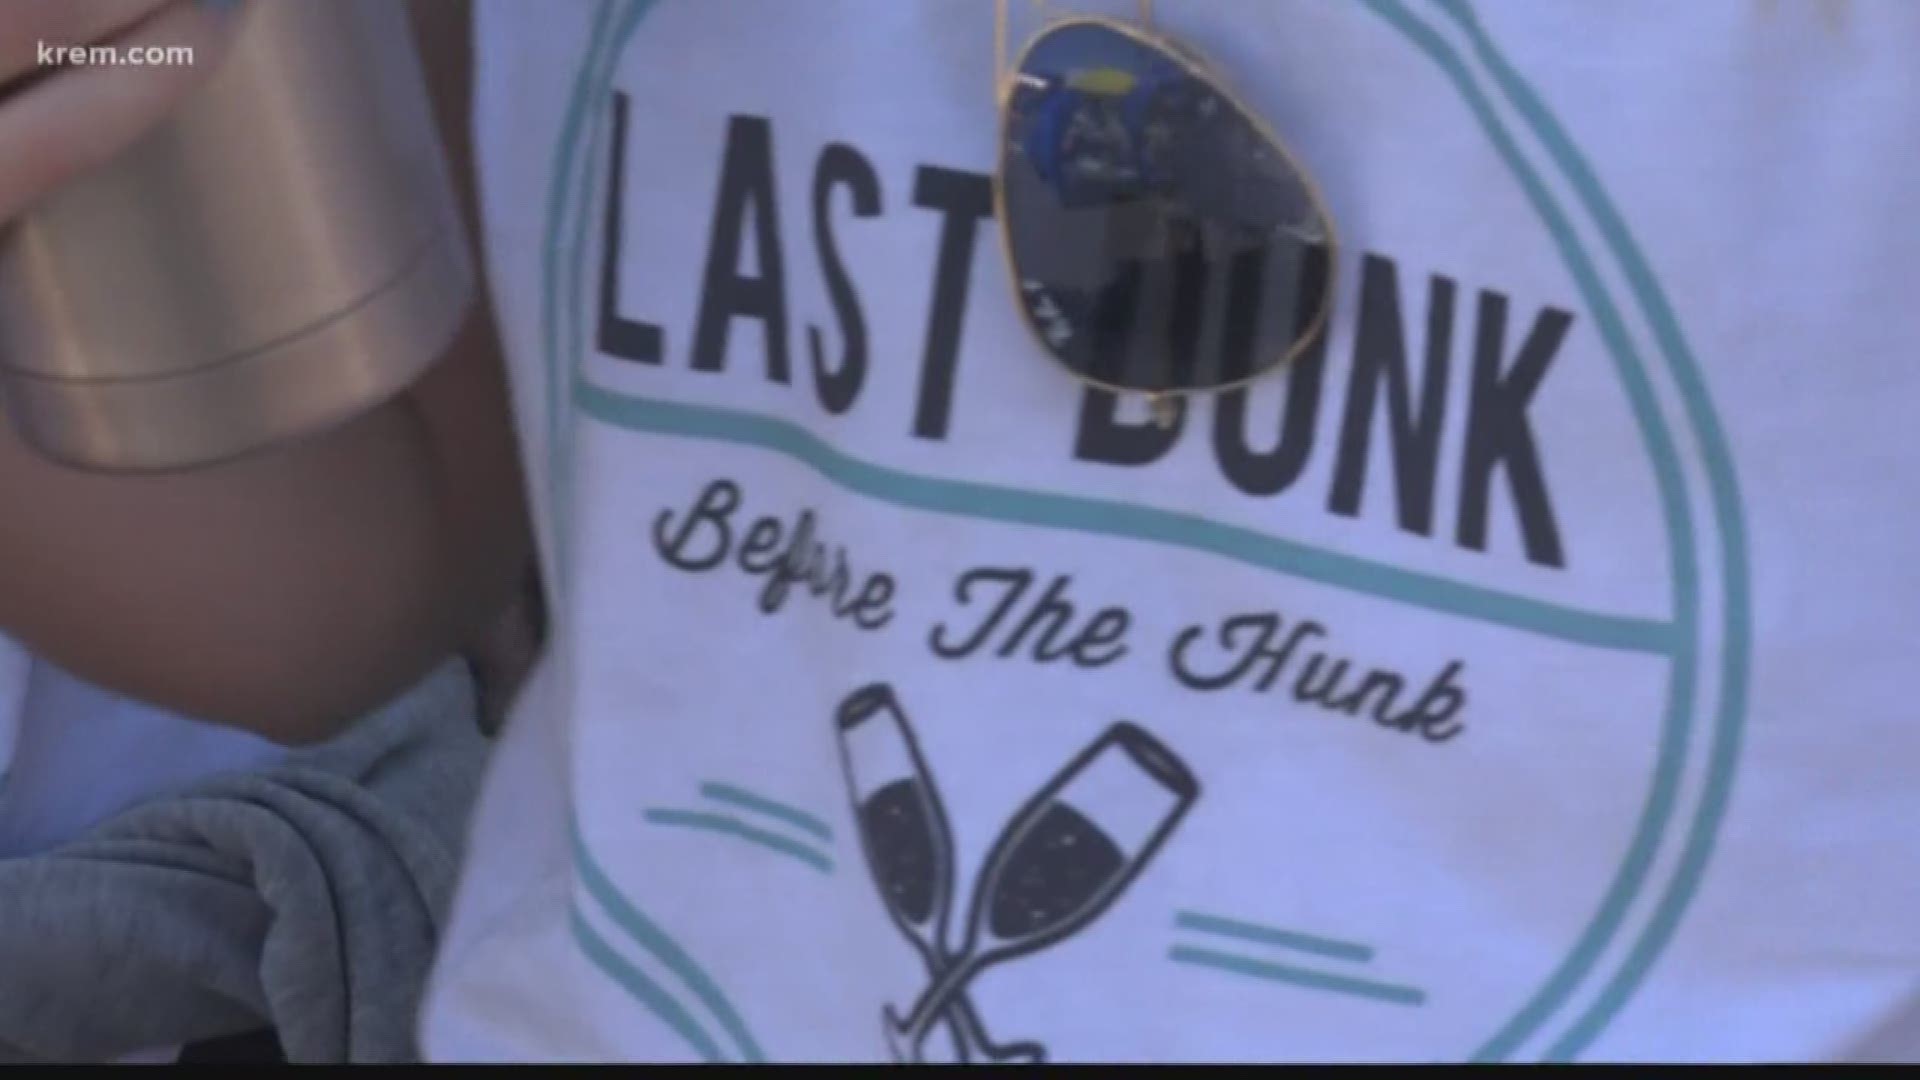 KREM's Shayna Waltower spoke with a team made up of a bride-to-be and her bachelorette party, who celebrated the upcoming nuptials by playing in Hoopfest.